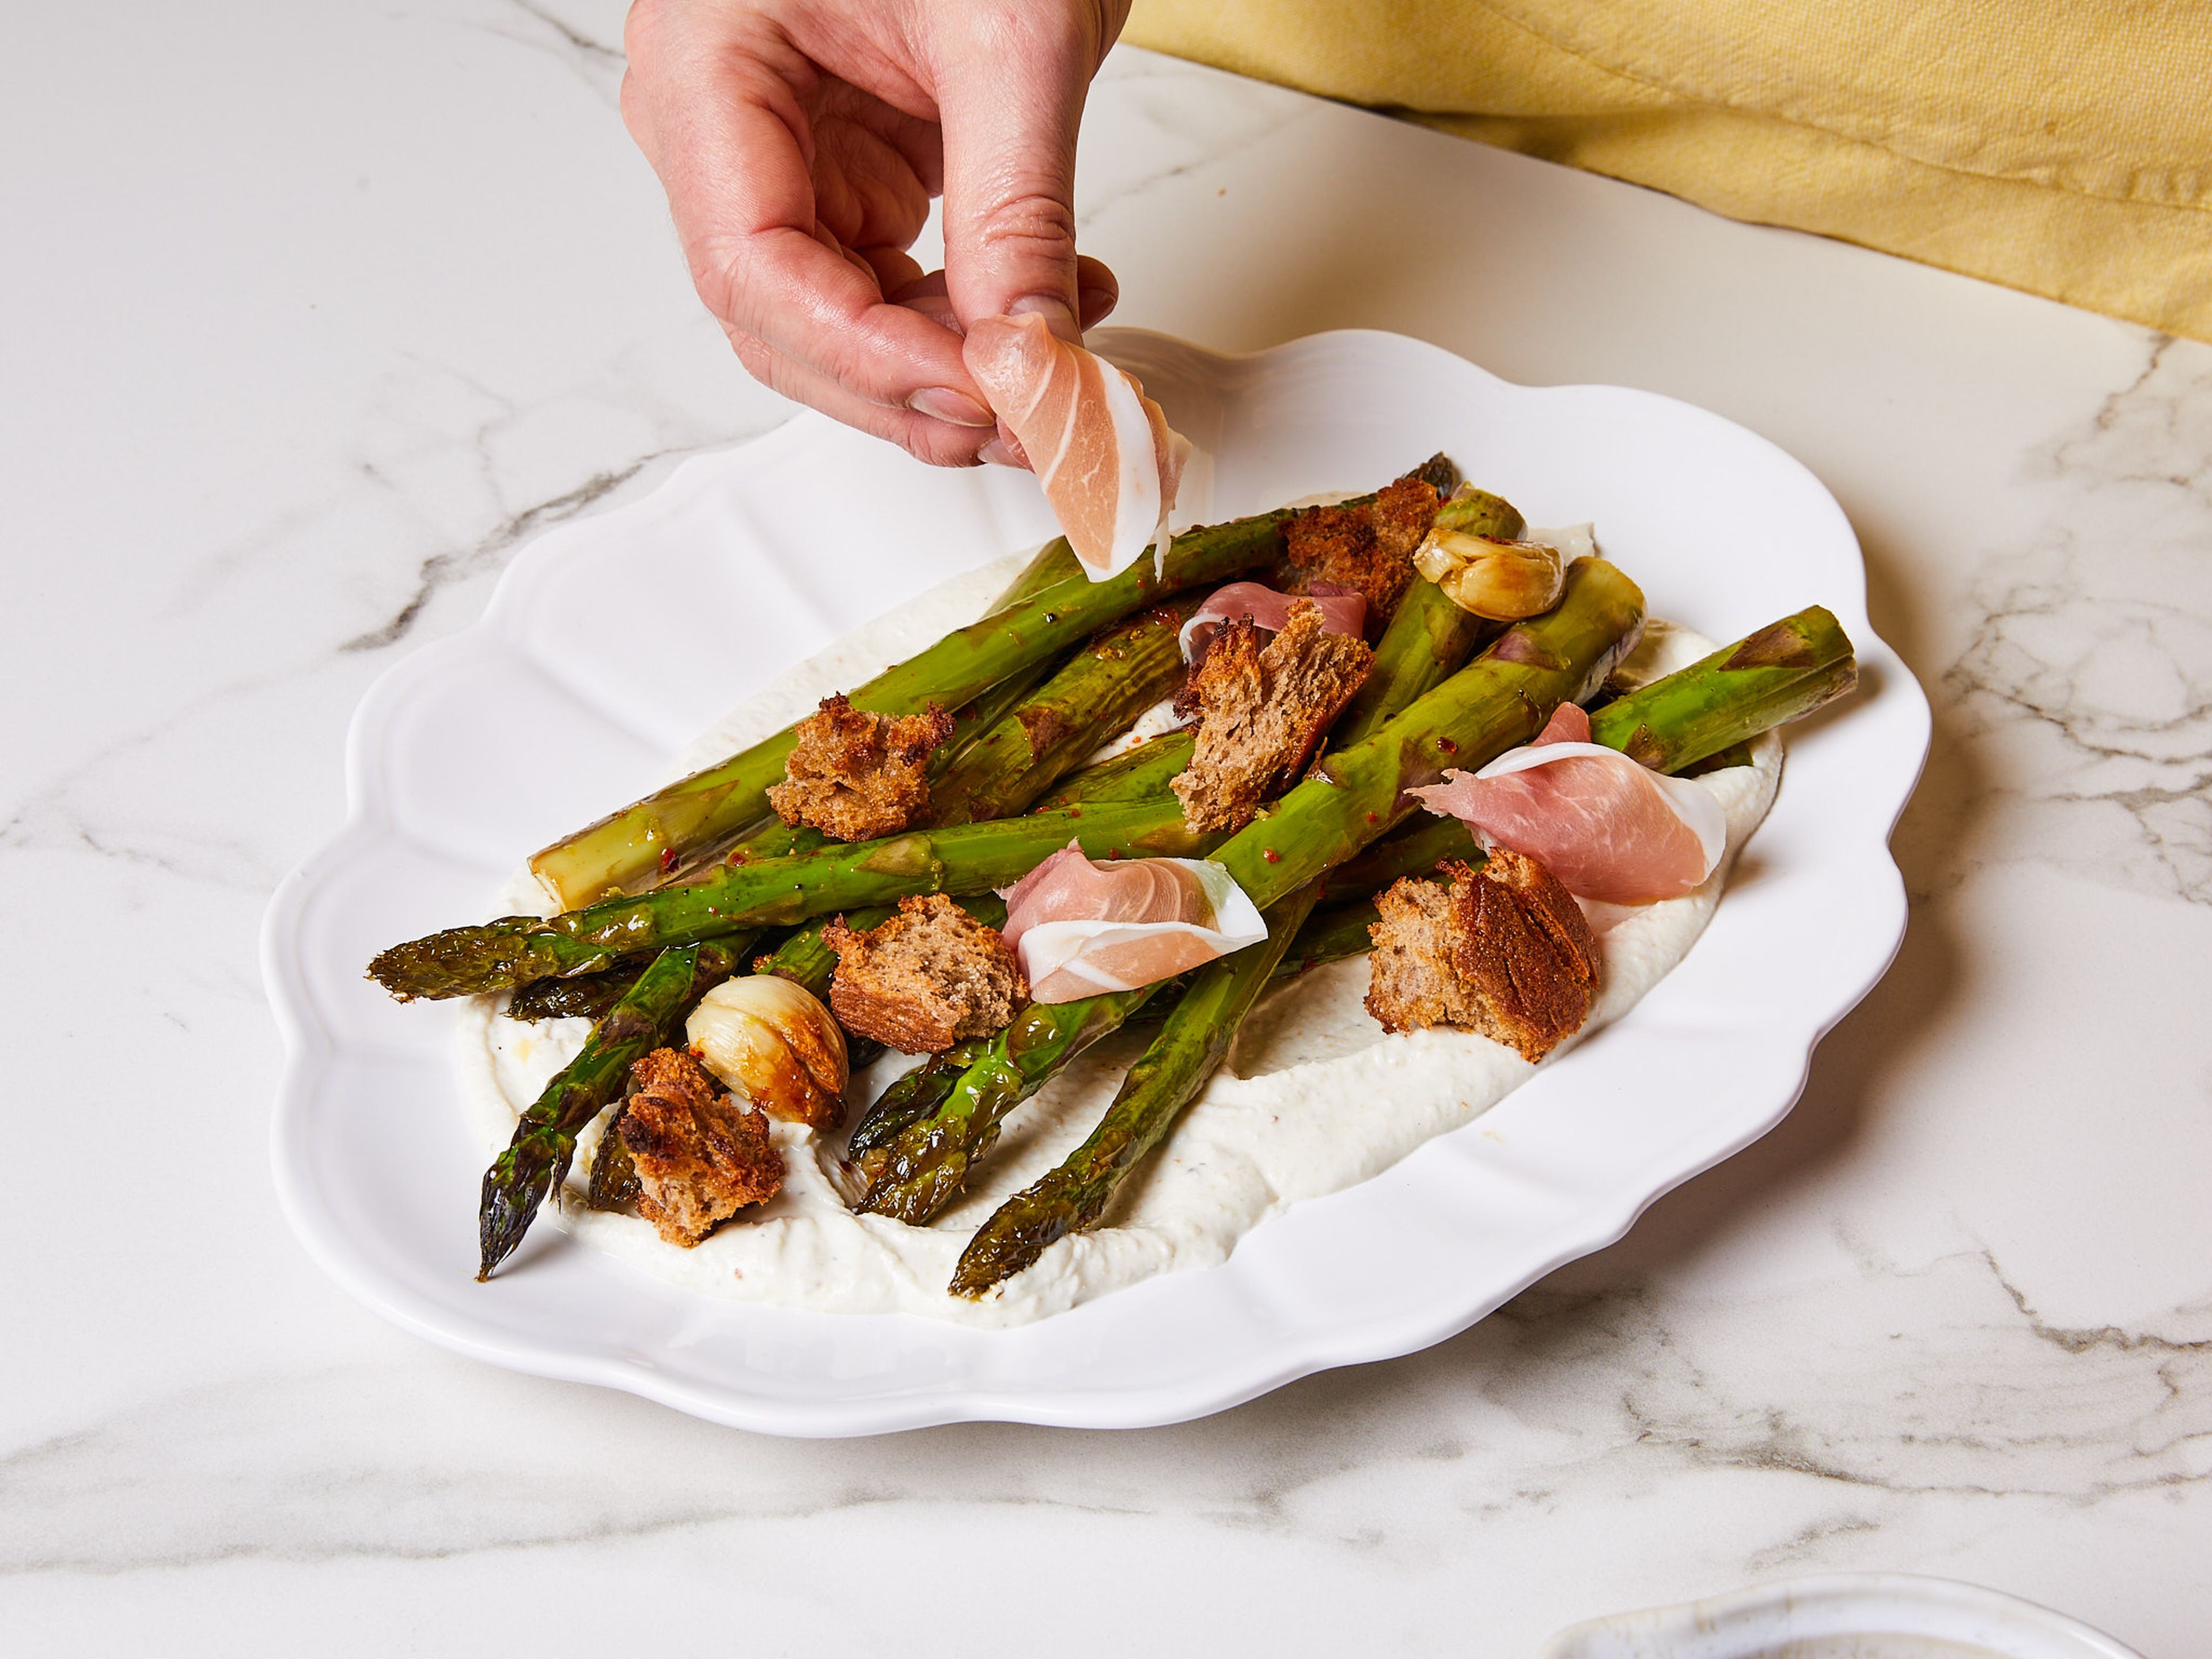 To serve, spread feta mix on a large serving platter or shallow bowl. Place the asparagus on top, drizzle the oil mix on top and spread croutons over it. Tear the prosciutto into pieces and scatter over the dish. Serve warm or at room temperature.